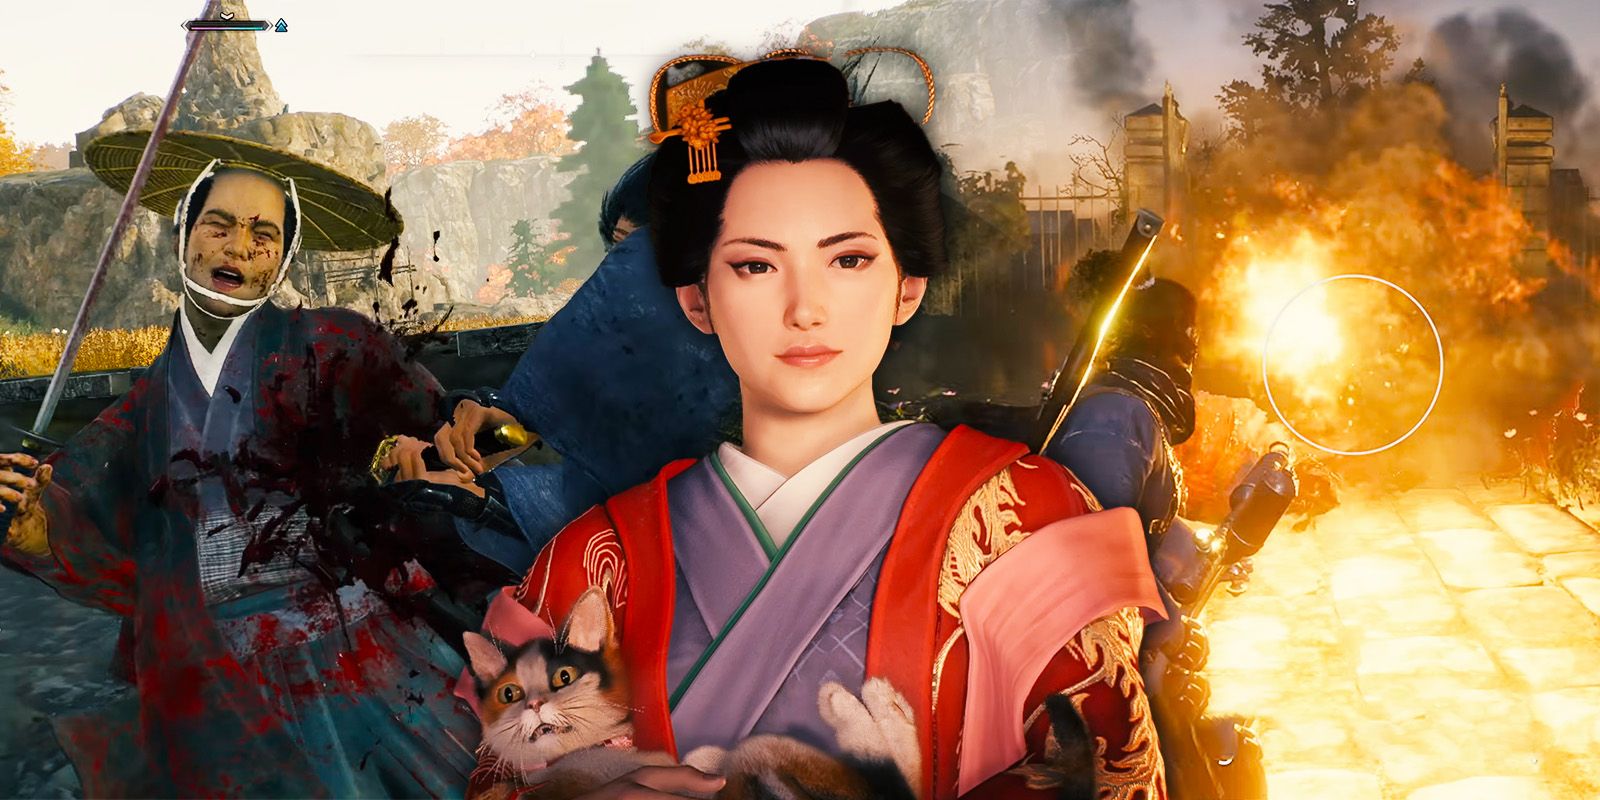 A closeup view of Princess Atsuko in the foreground, with gameplay from Rise of the Ronin behind her